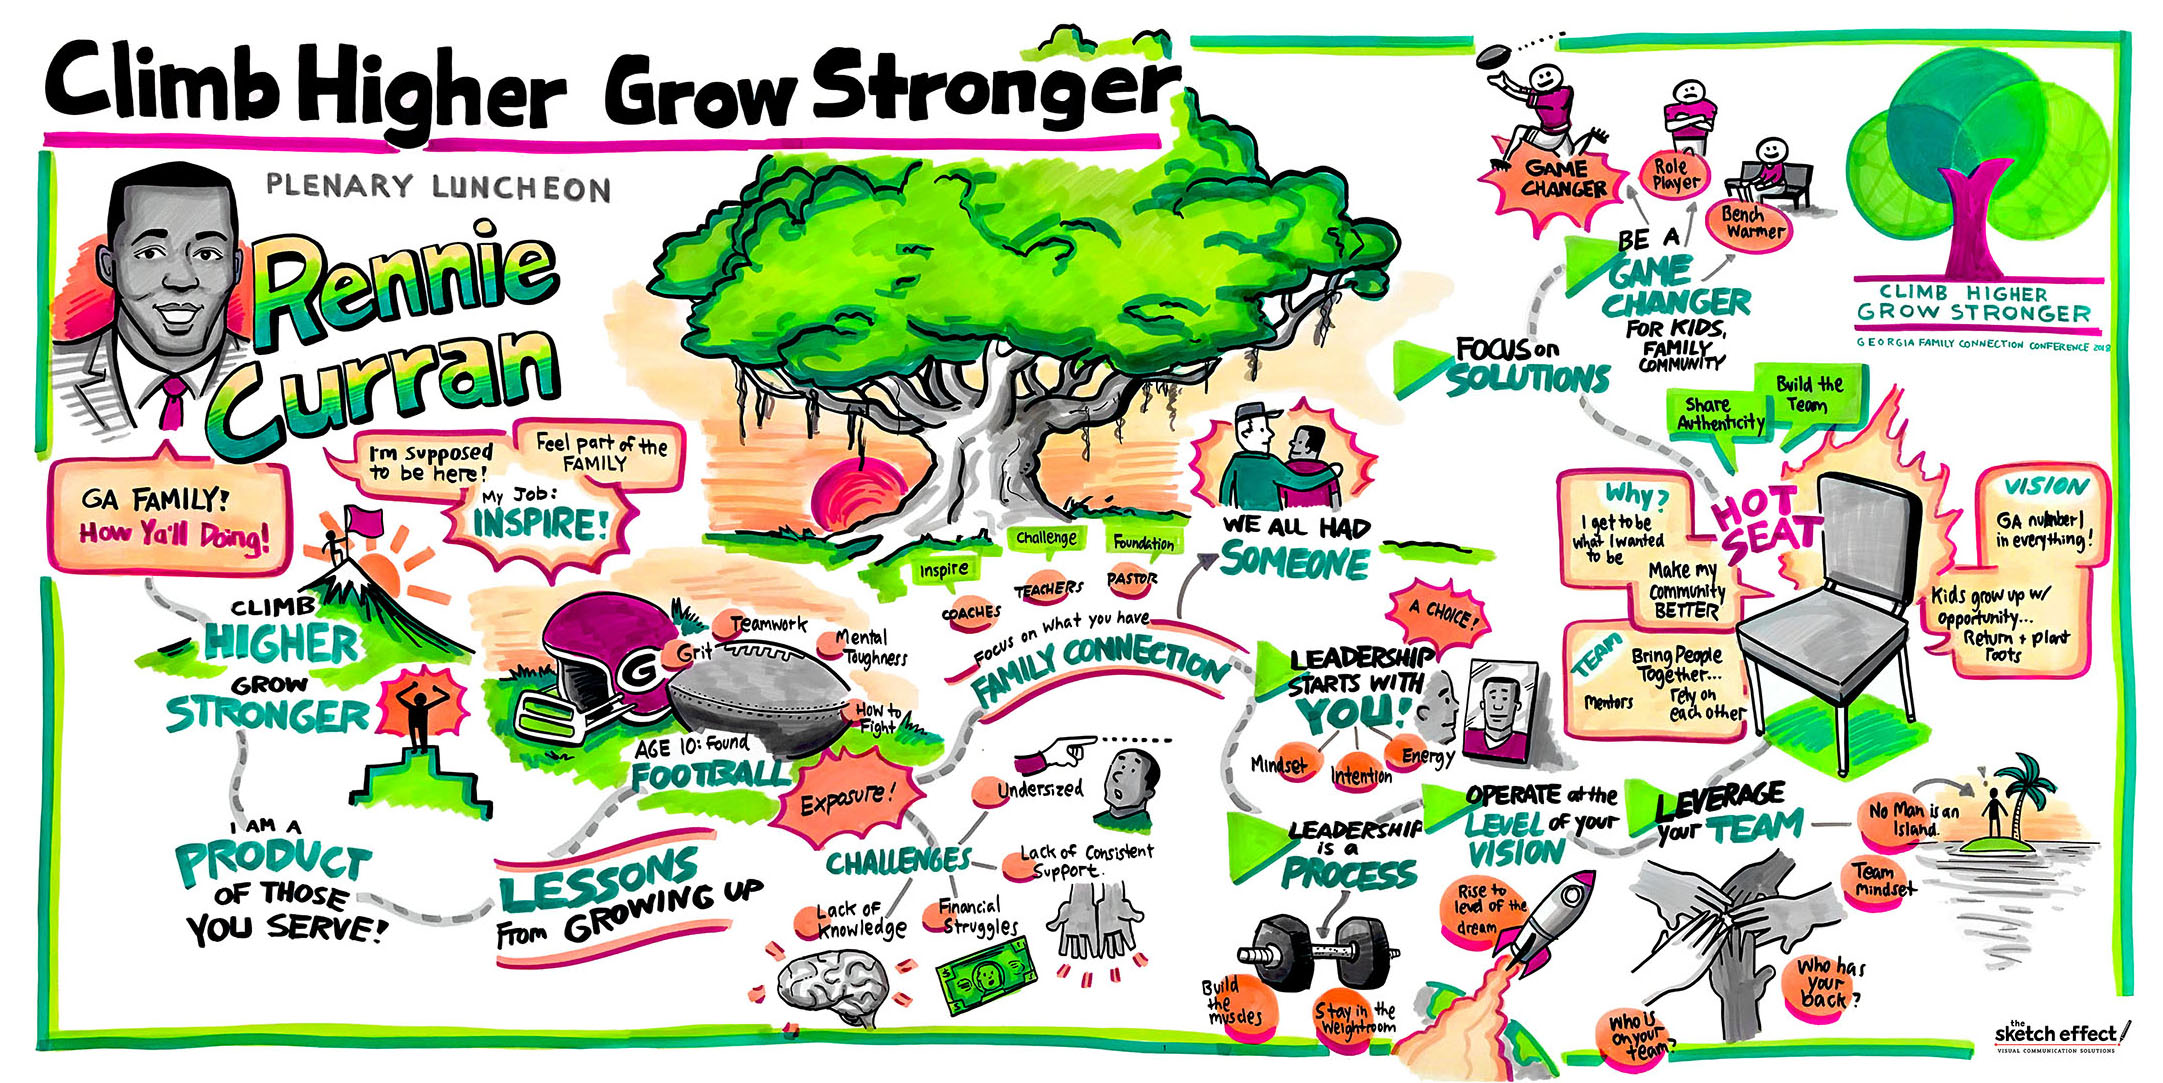 Graphic recording by The Sketch Effect titled Climb Higher Grow Stronger